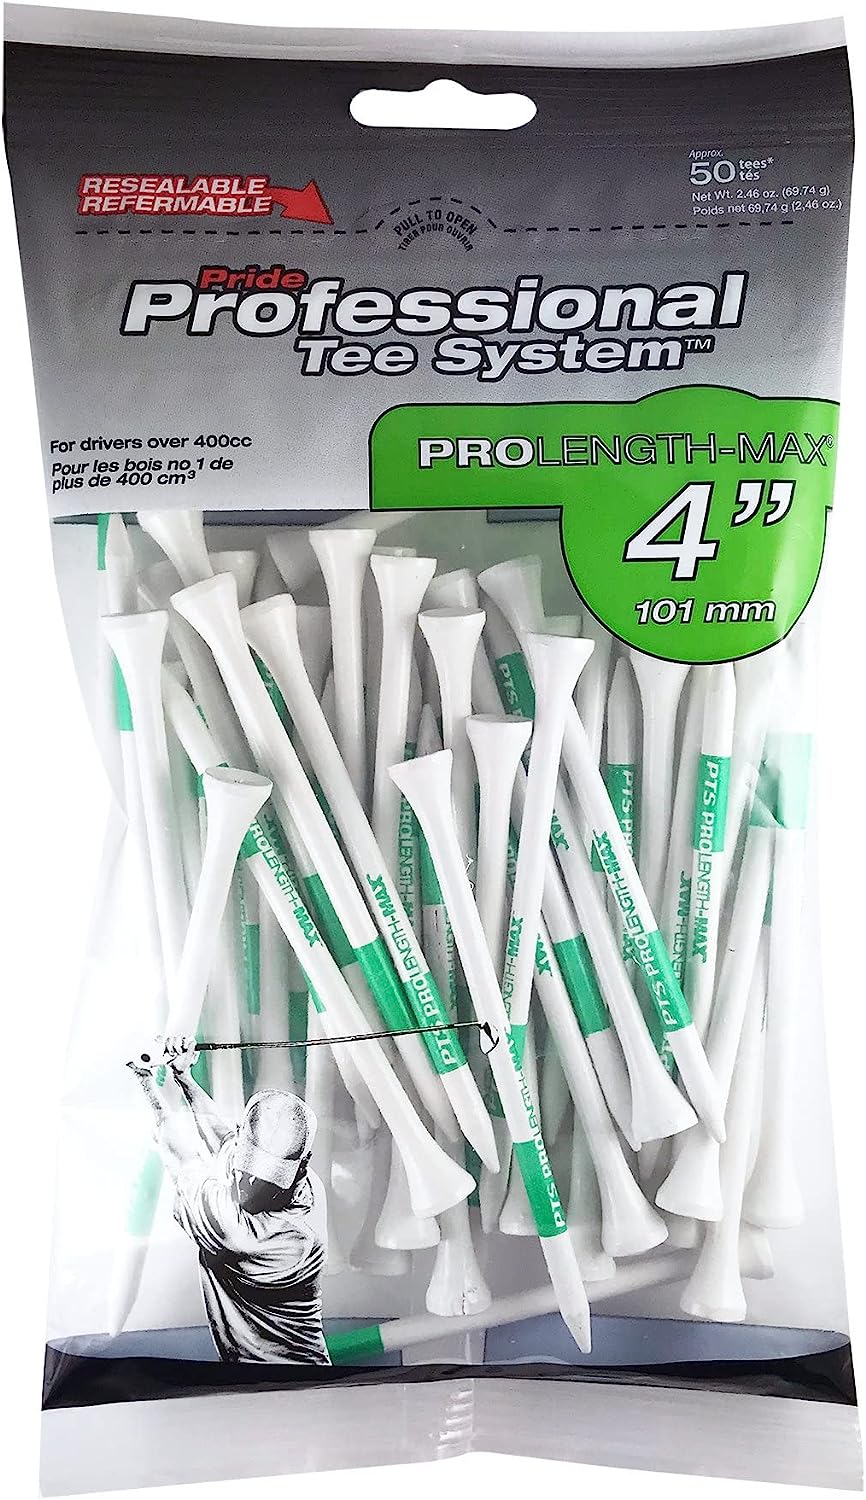 Professional Tee System-Prolength Max 4